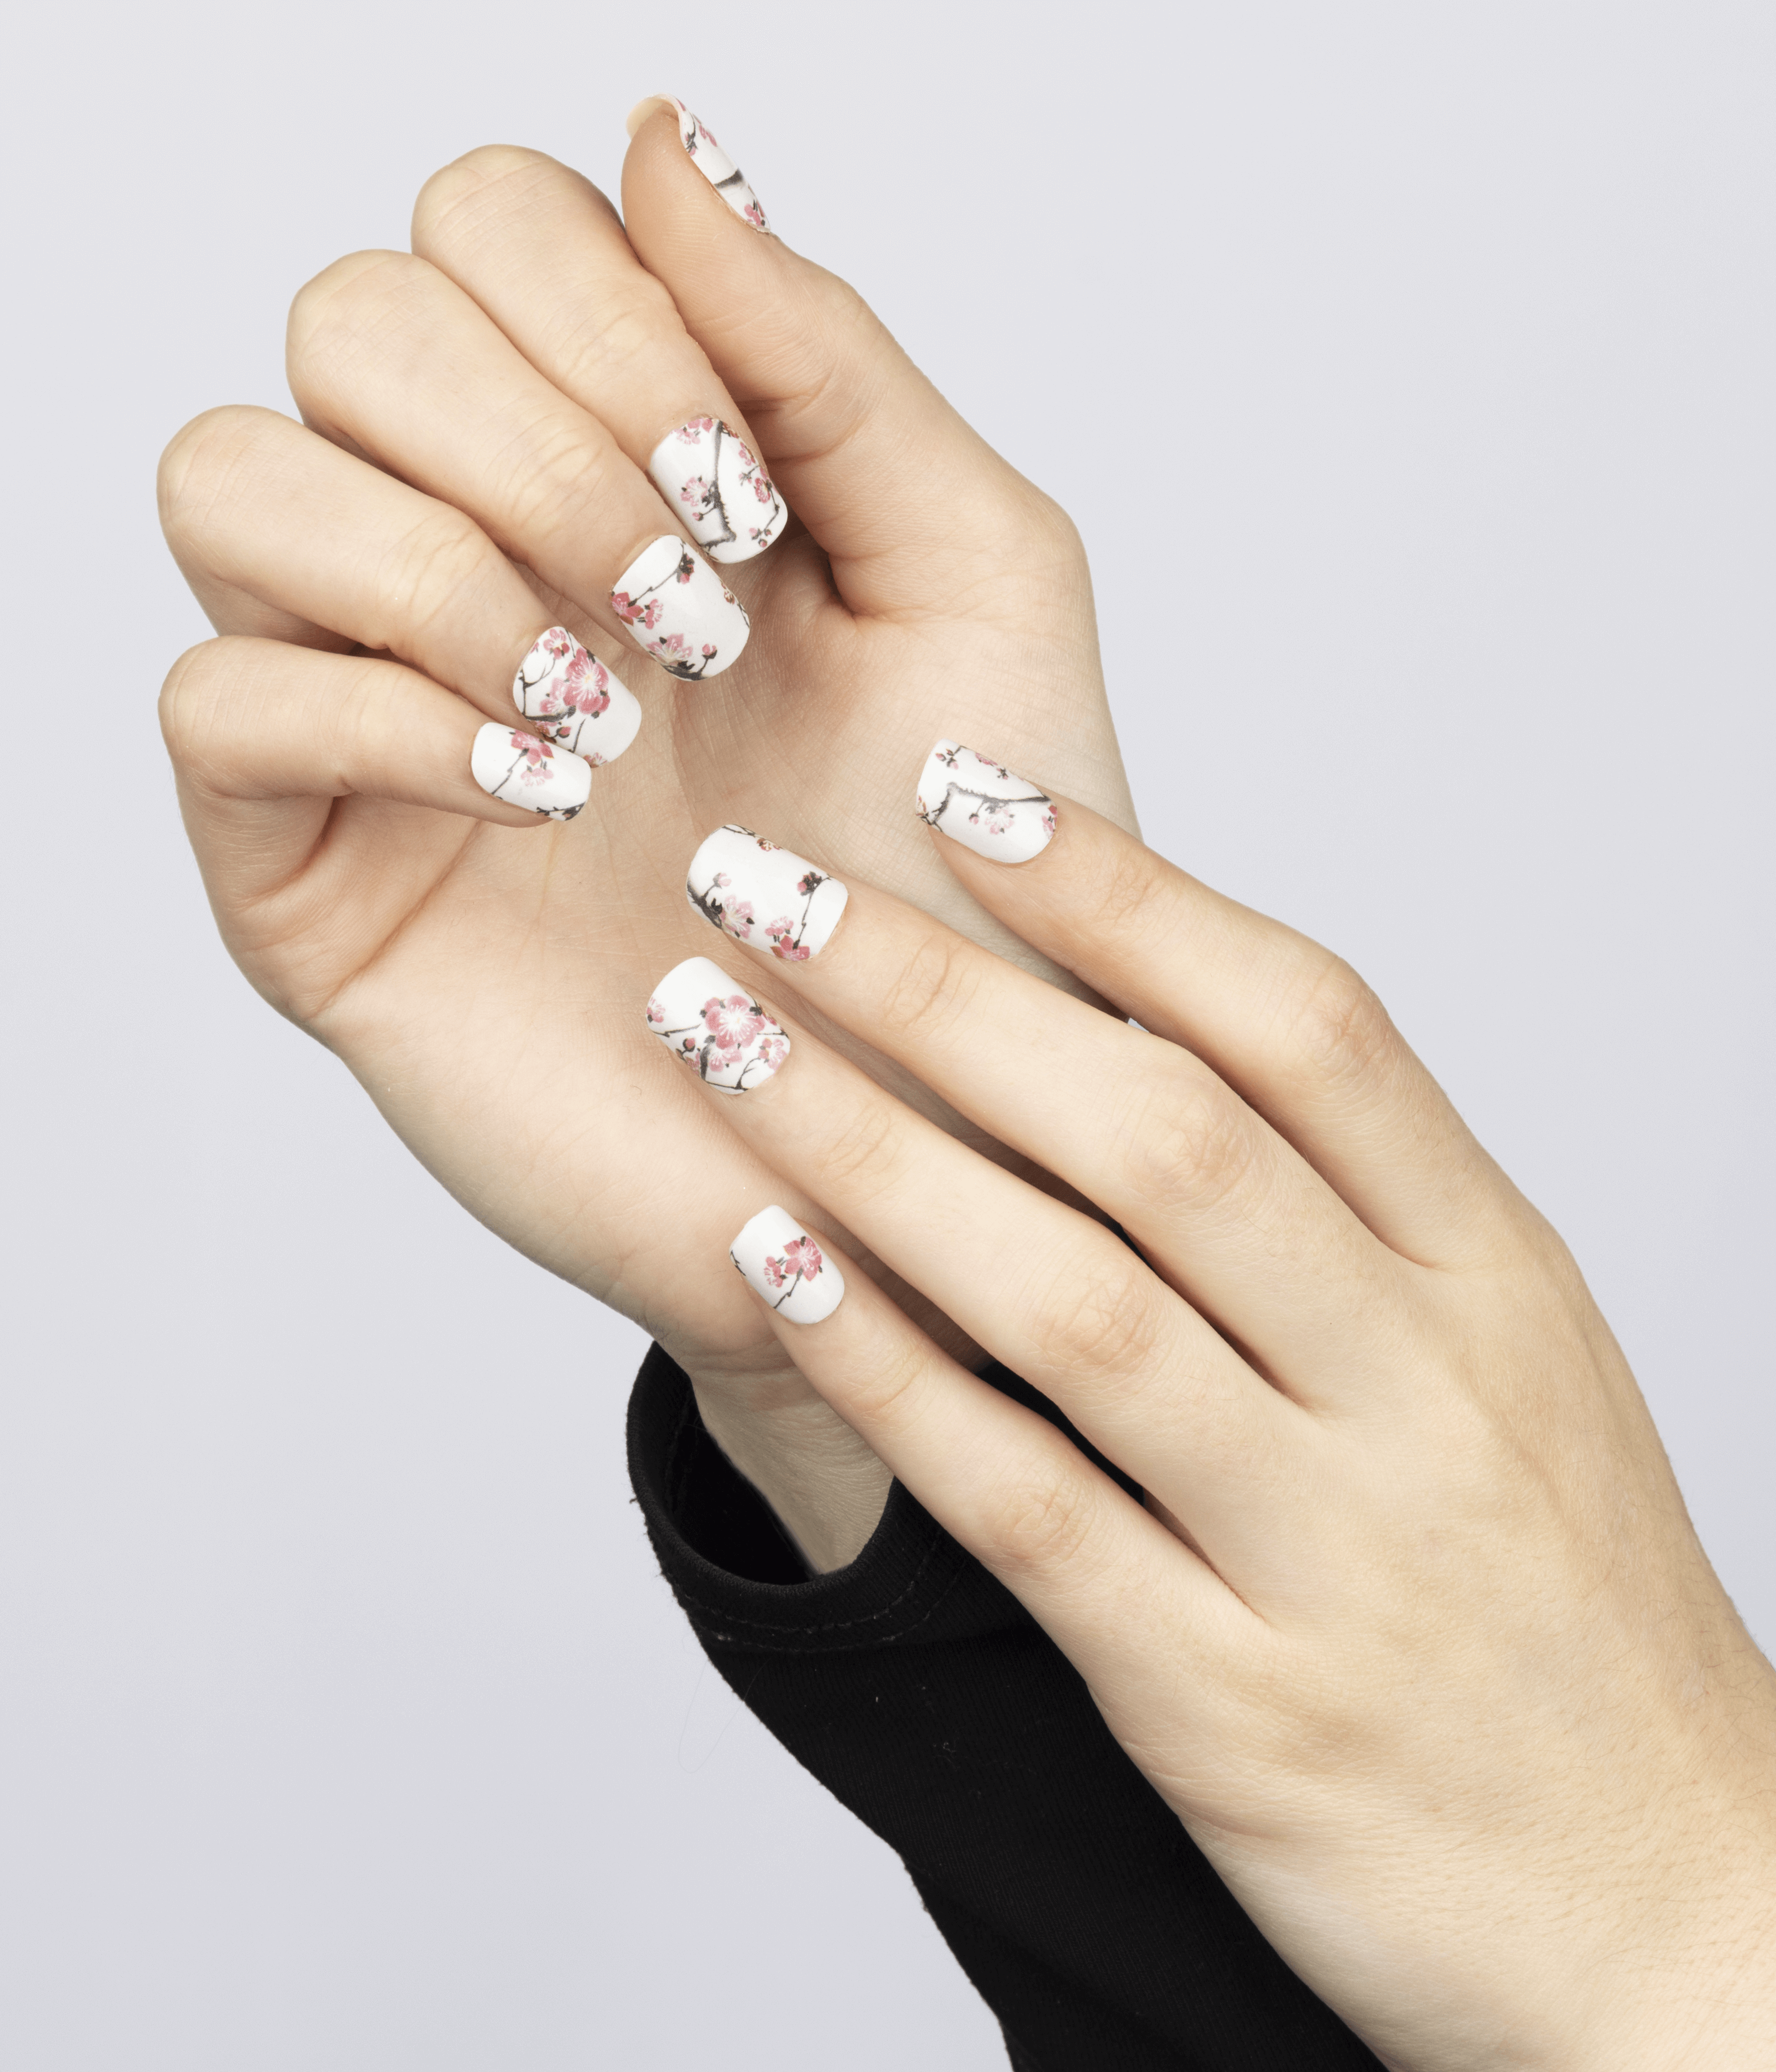 A Thousand Cherry Blossoms Nail Wraps Online Shop - Lily and Fox